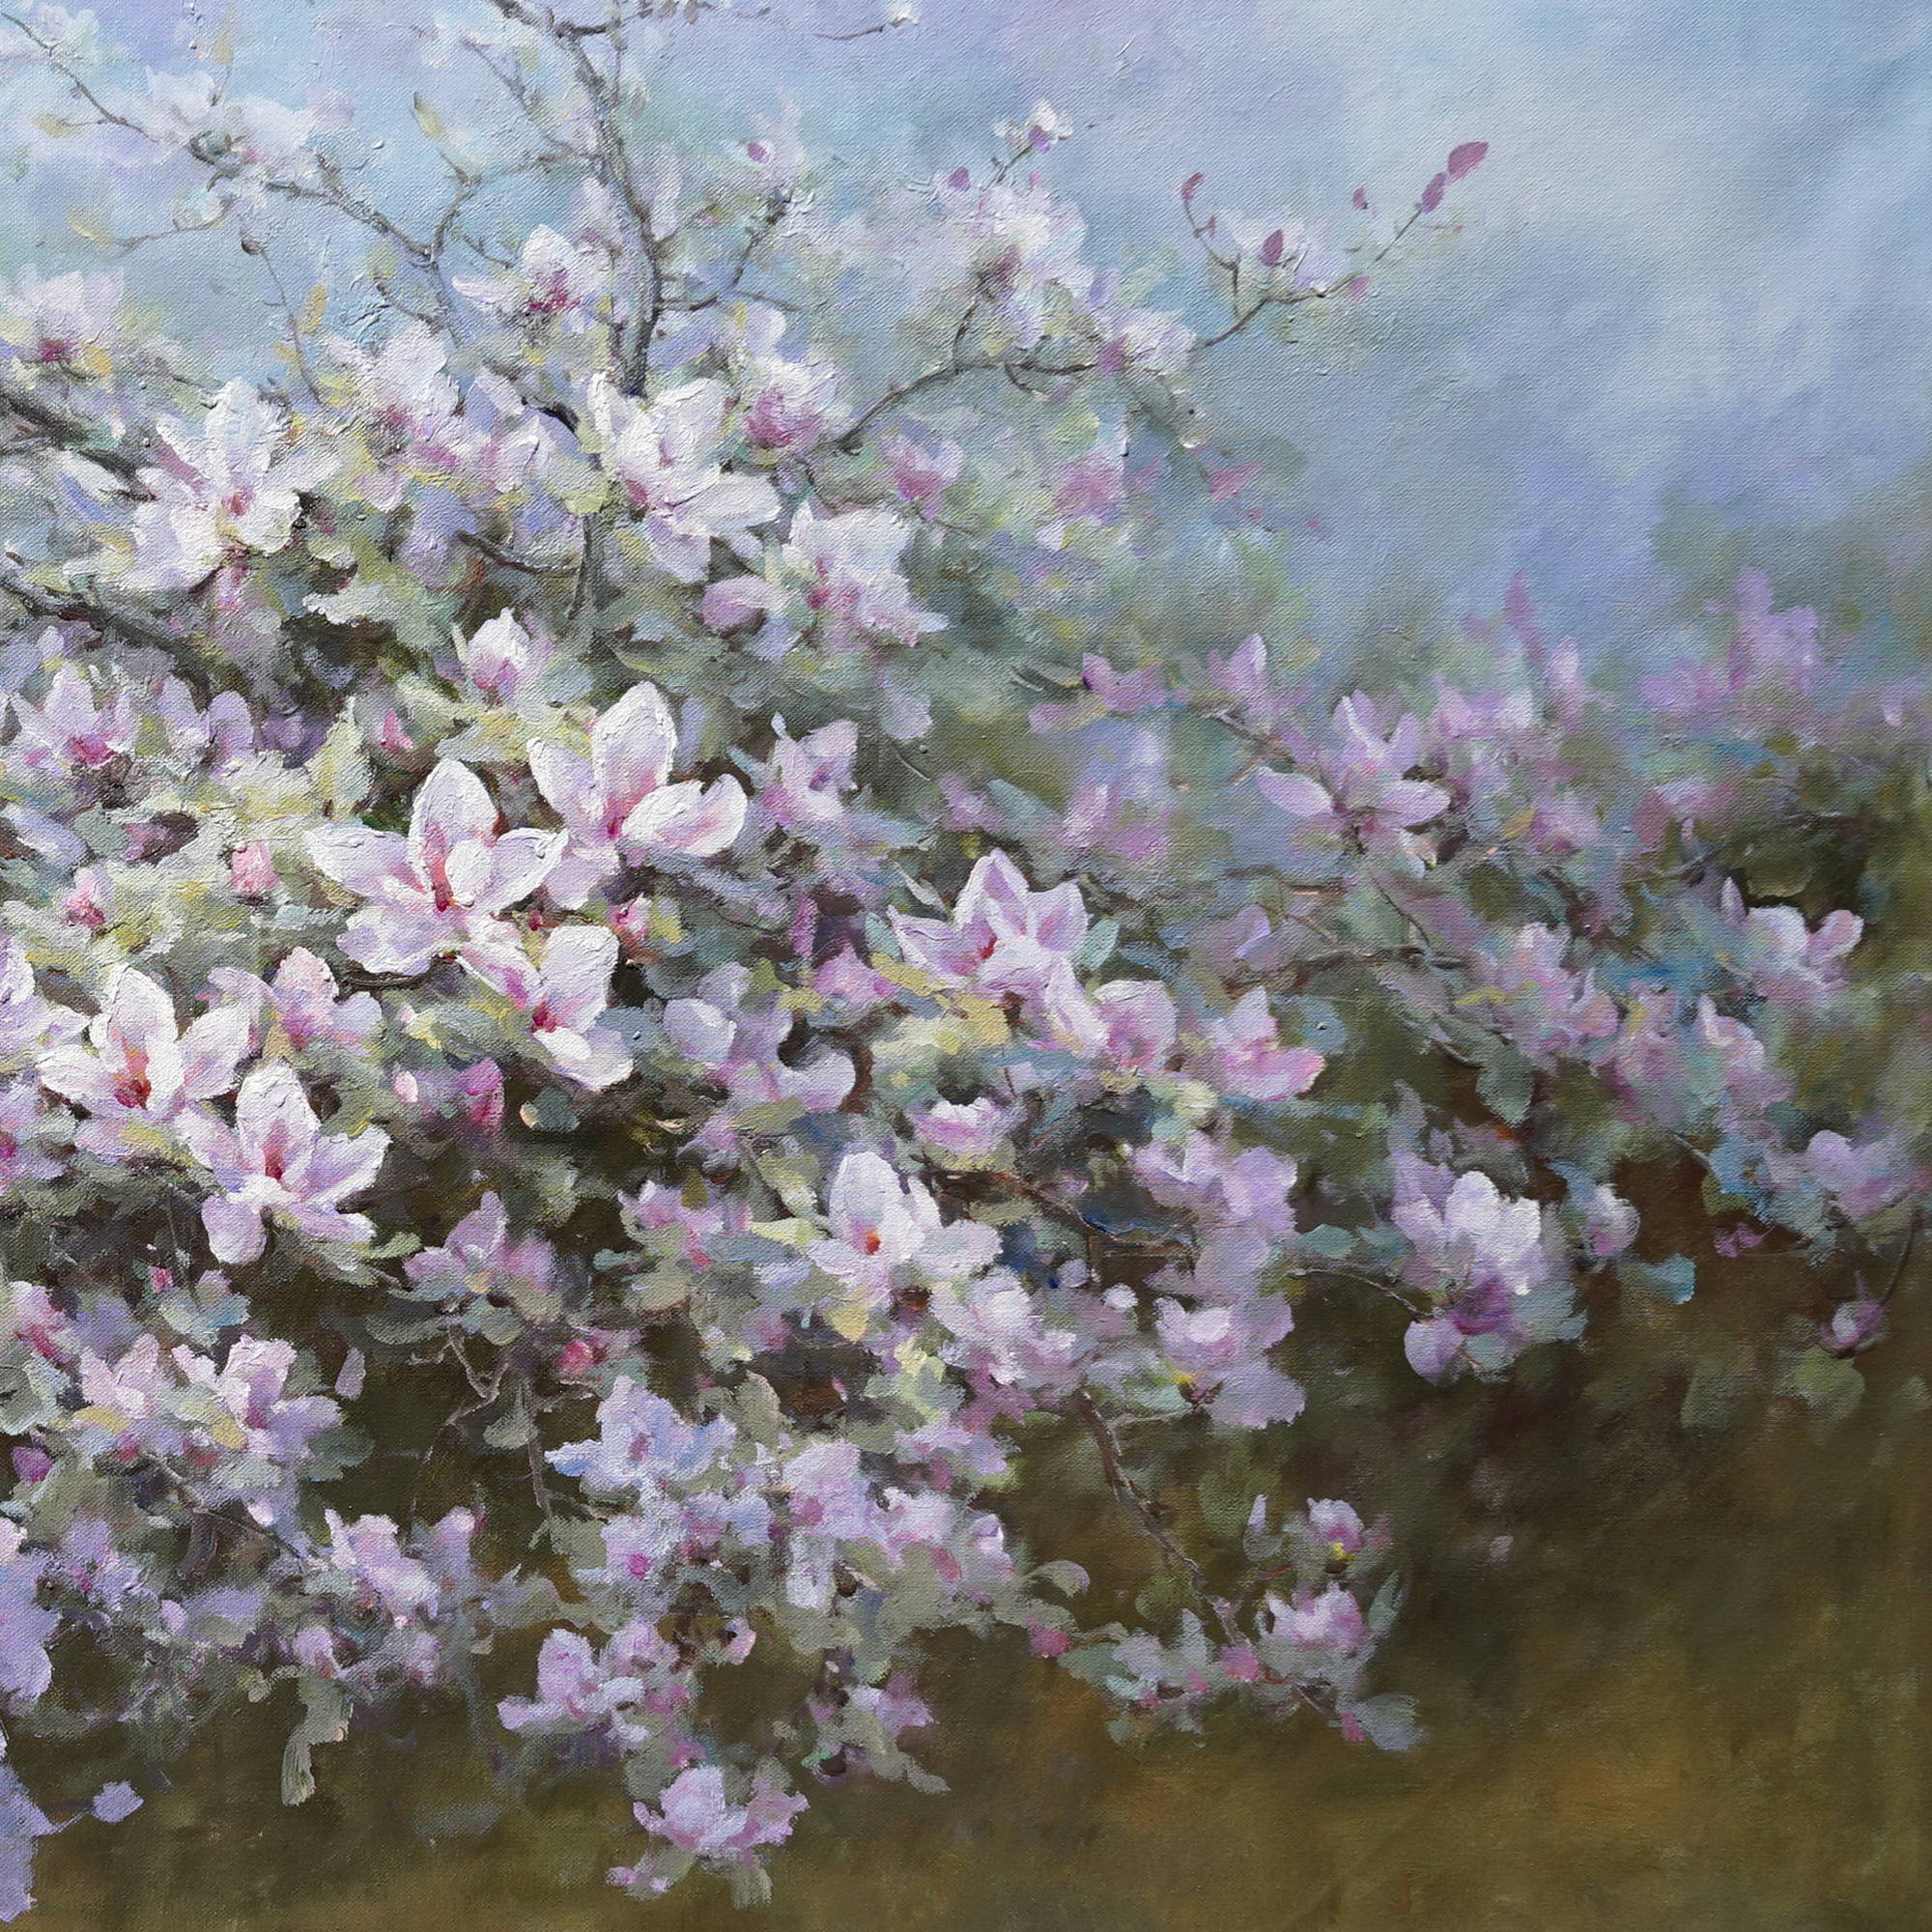 Hand painted Nature Magnolias in Bloom 90x180cm